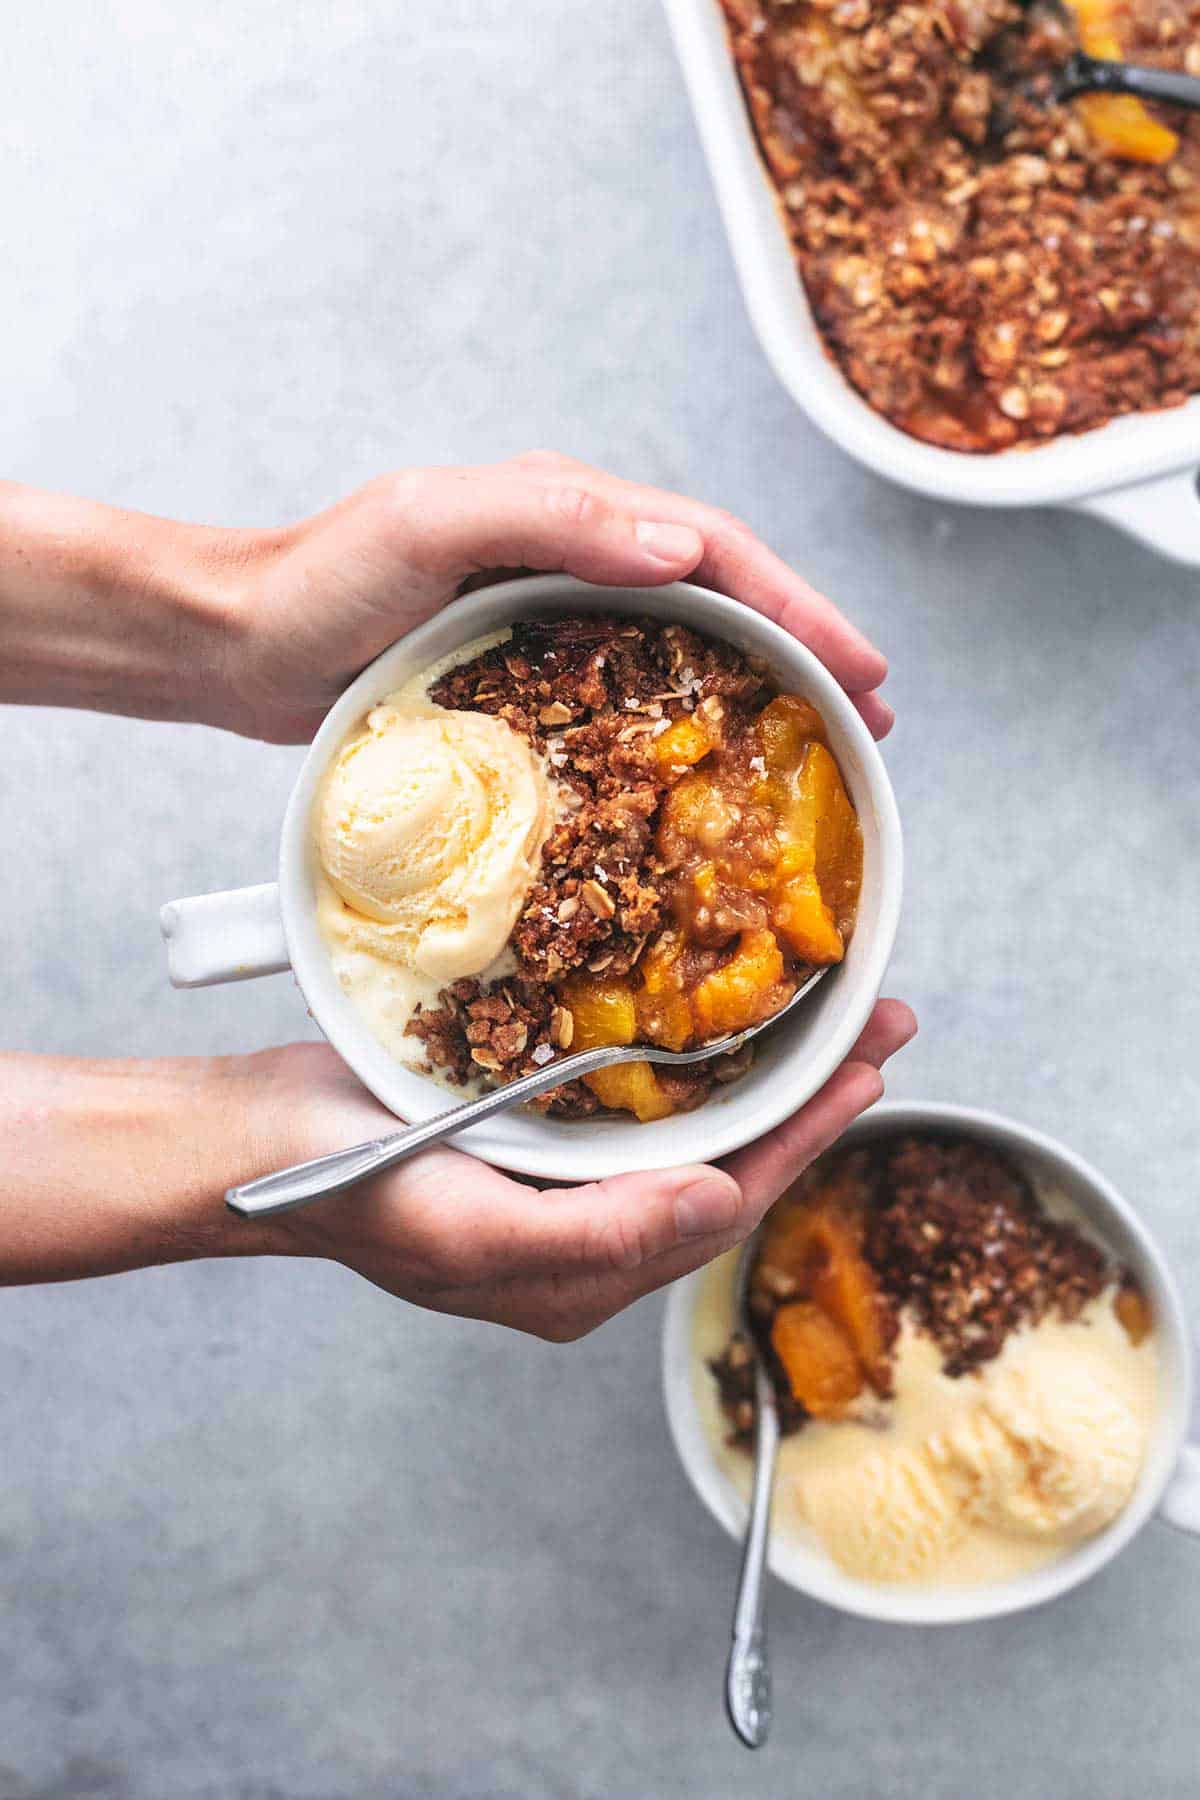 top view of hands holding a bowl of peach crisp with another bowl and a baking pan of peach crisp on the side.